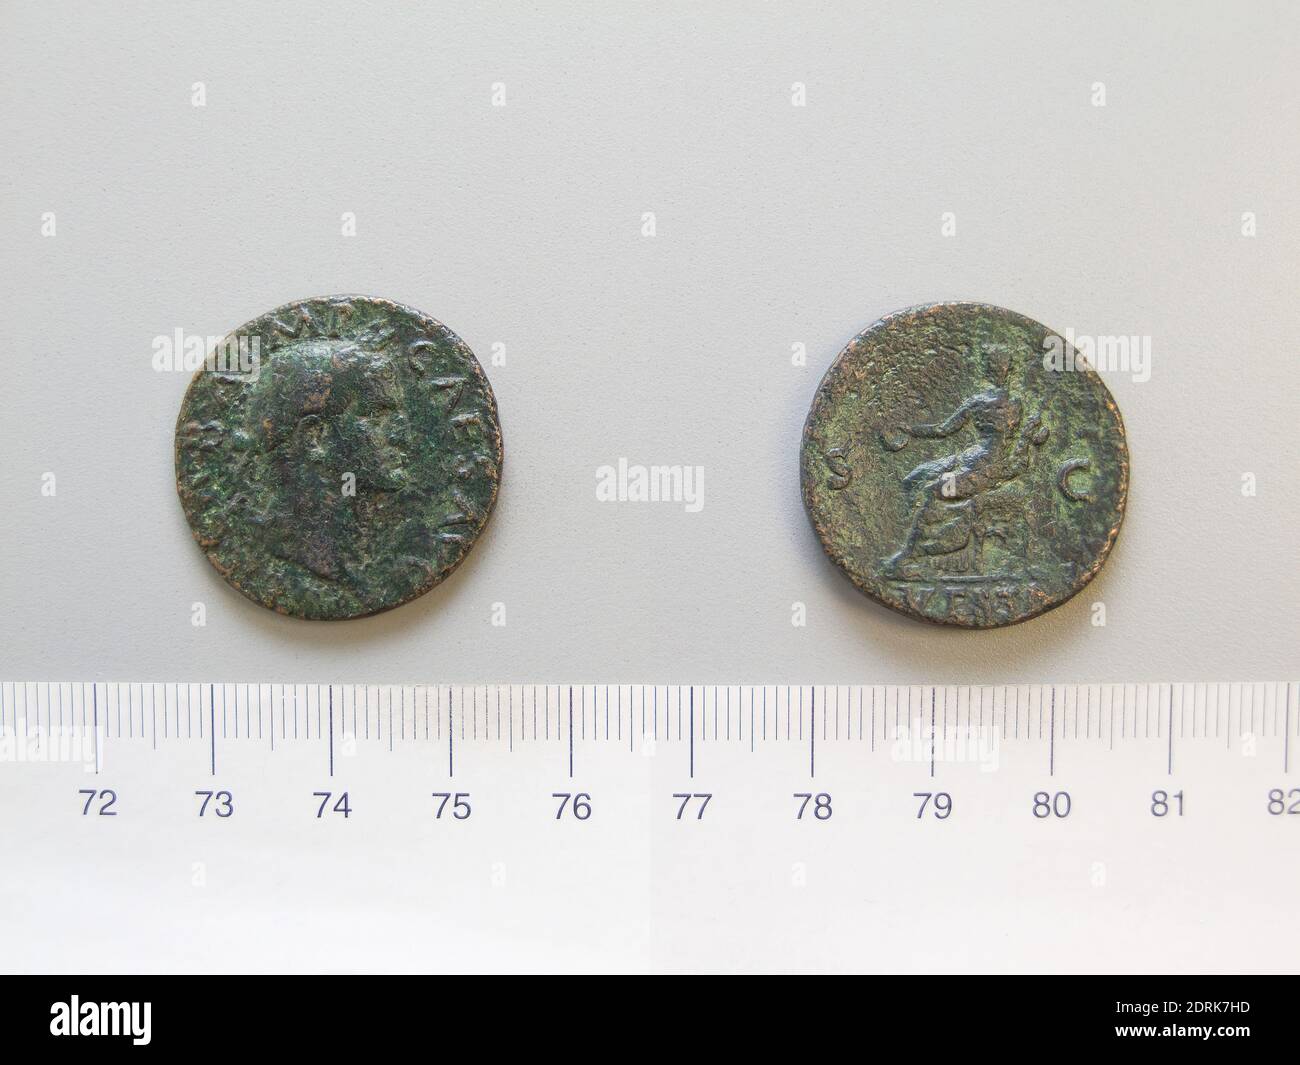 Ruler: Galba, Emperor of Rome, 3 B.C.–A.D. 69, ruled  A.D. 68–69, Mint: Rome, 1 As of Galba, Emperor of Rome from Rome, 68, Bronze, 10.98 g, 6:00, 28 mm, Made in Rome, Italy, Roman, 1st century A.D., Numismatics Stock Photo